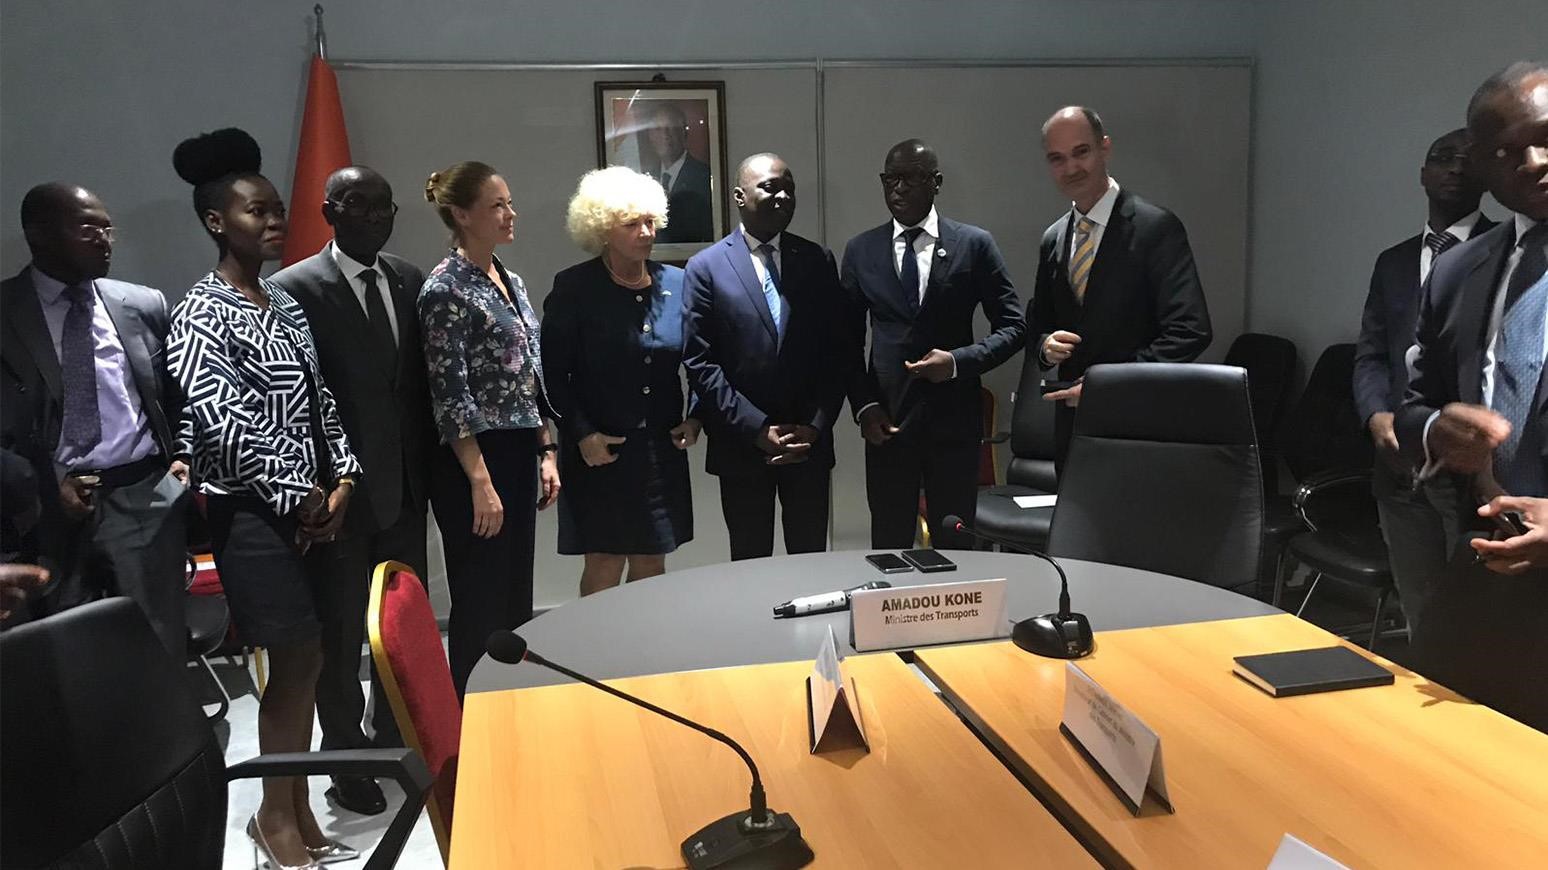 Scania To Help Abidjan, Côte d’Ivoire, Develop More Sustainable Public Transport System With 450 Buses, Infrastructure Upgrades & Biofuel Research